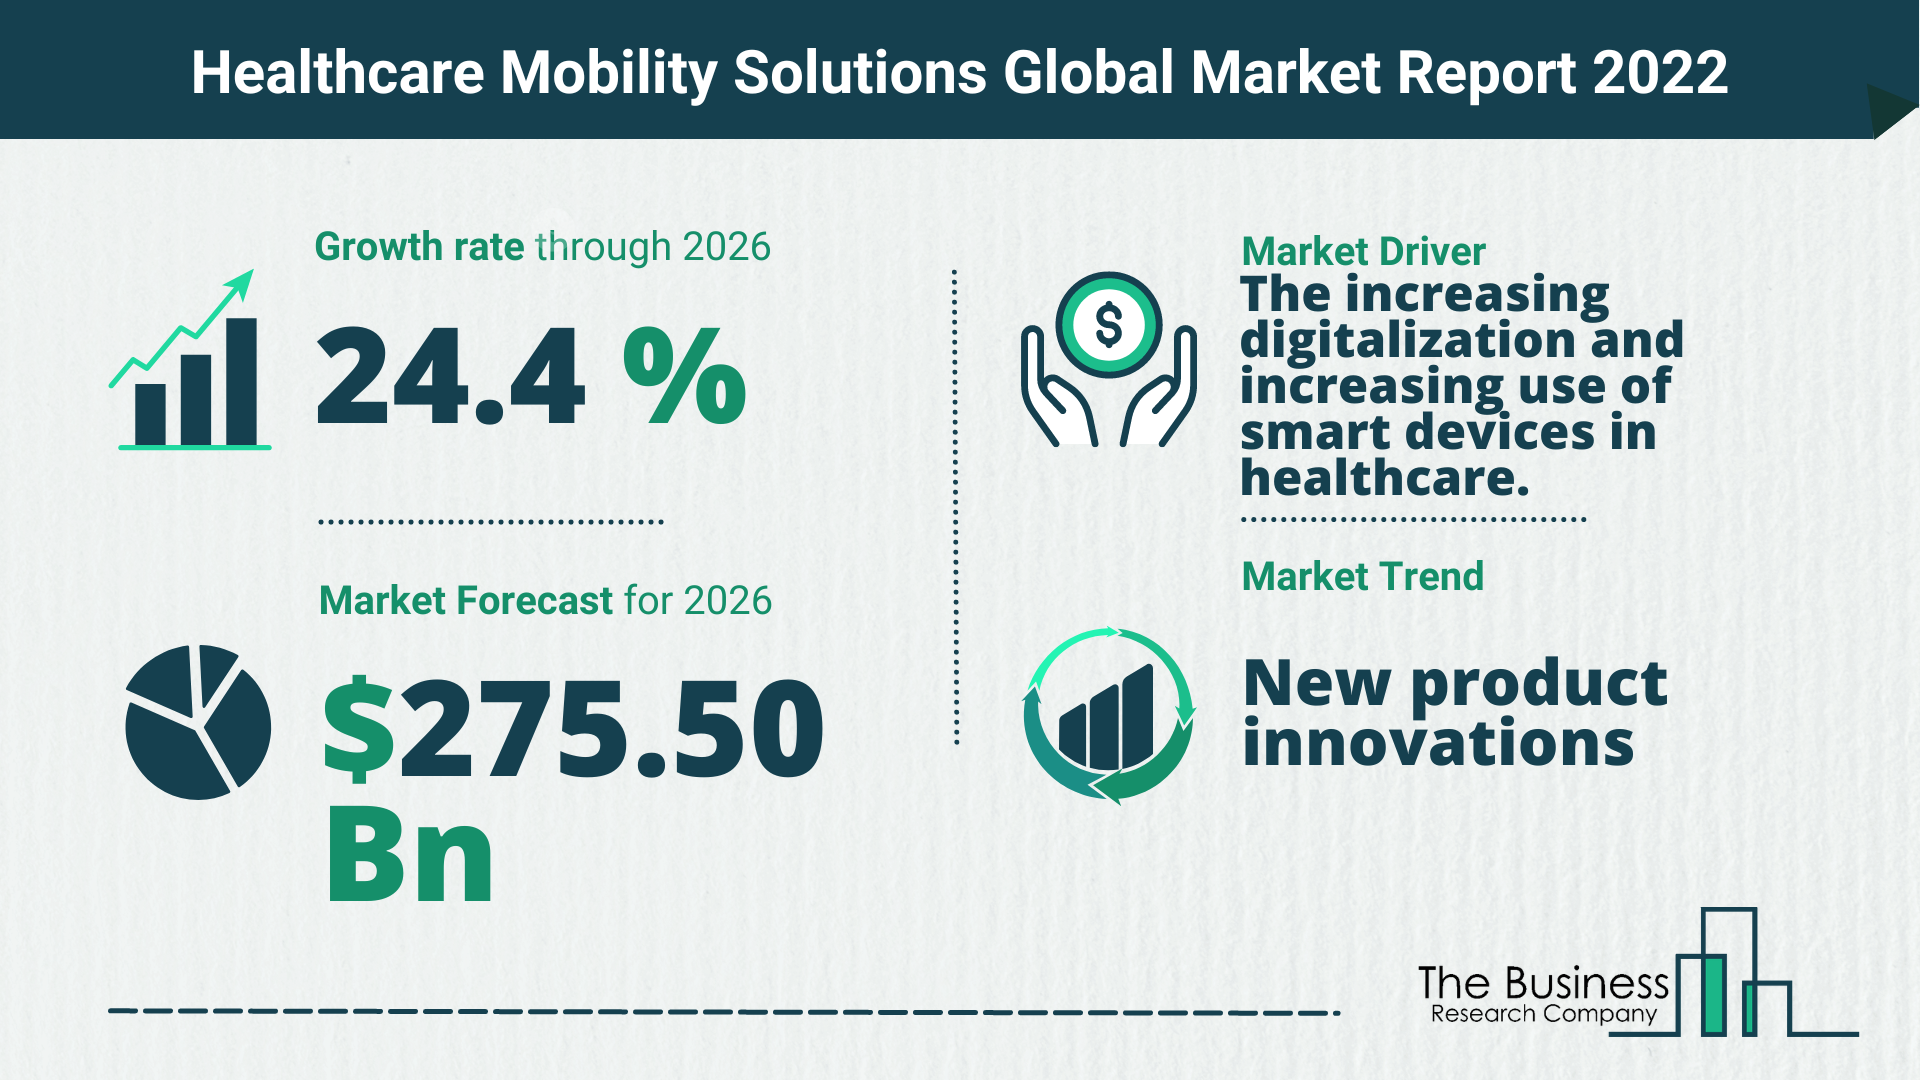 What Is The Healthcare Mobility Solutions Market Overview In 2022?